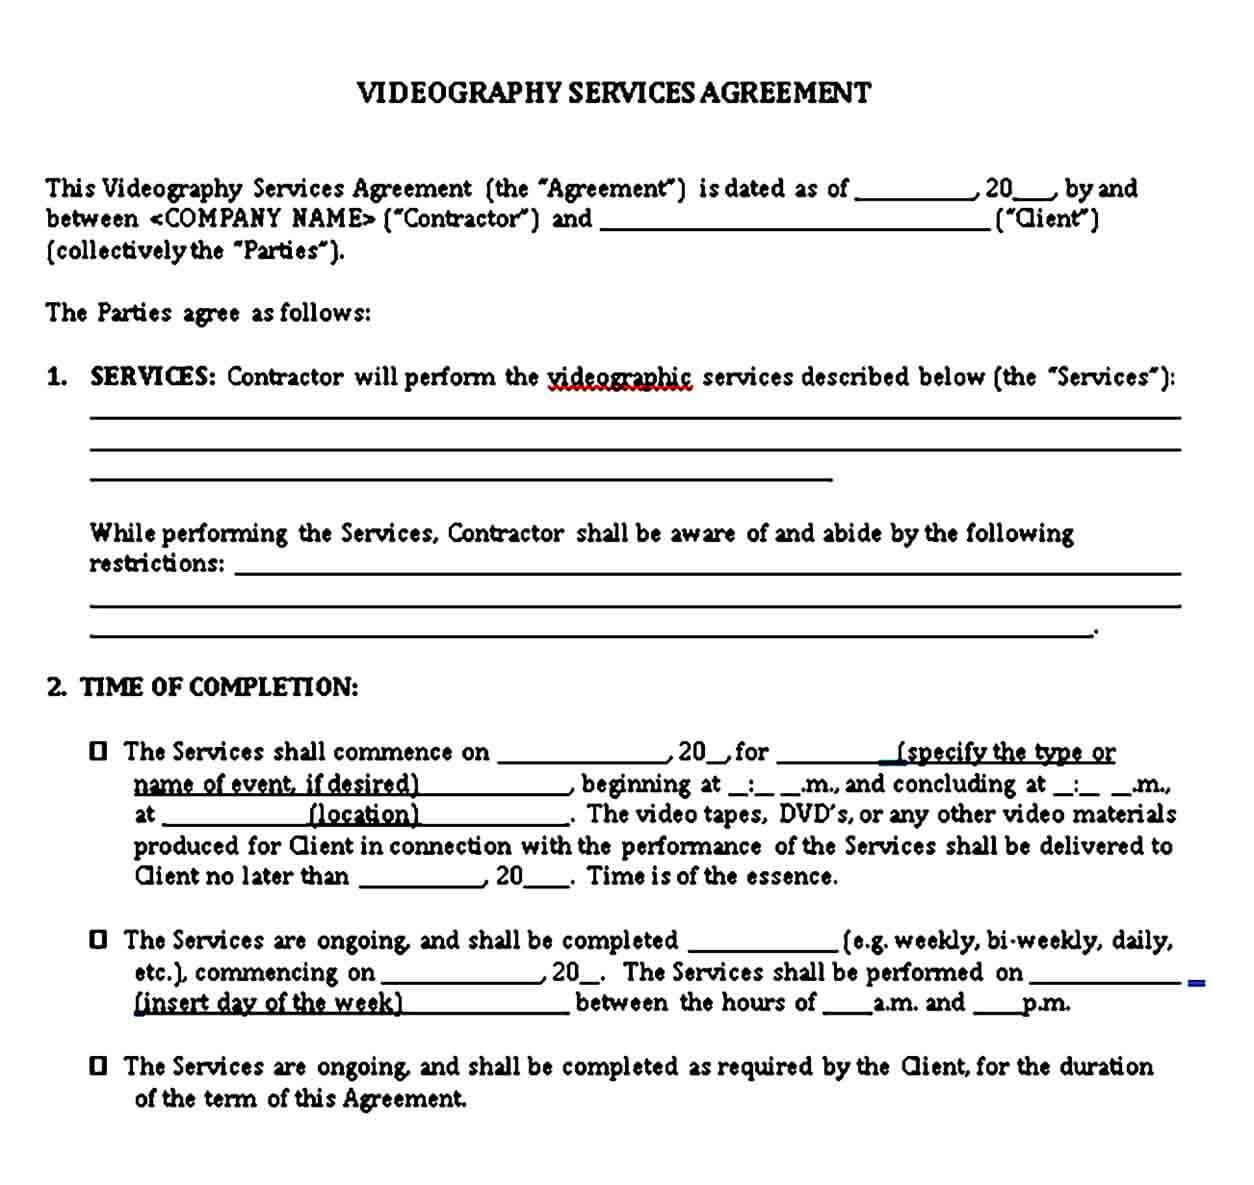 Videography Services Agreement Template